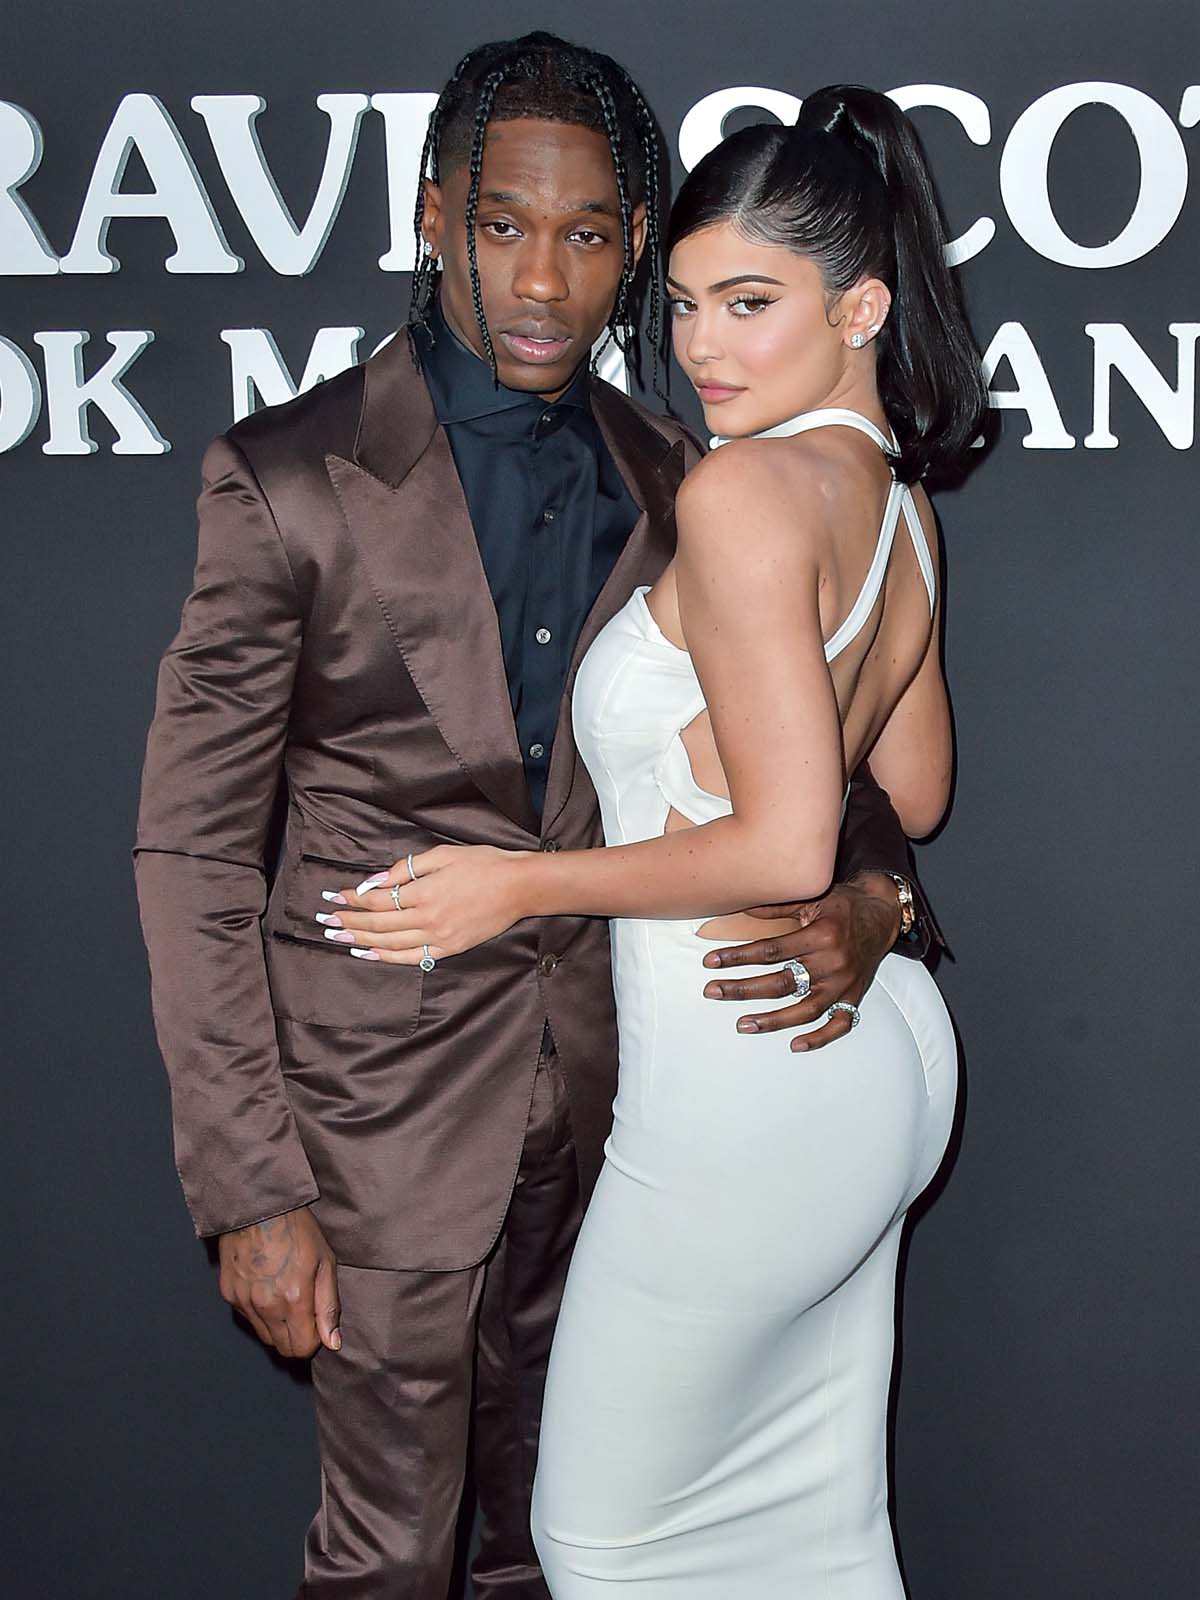 Kylie Jenner Travis Scott Dont Have A Traditional Relationship Us Weekly